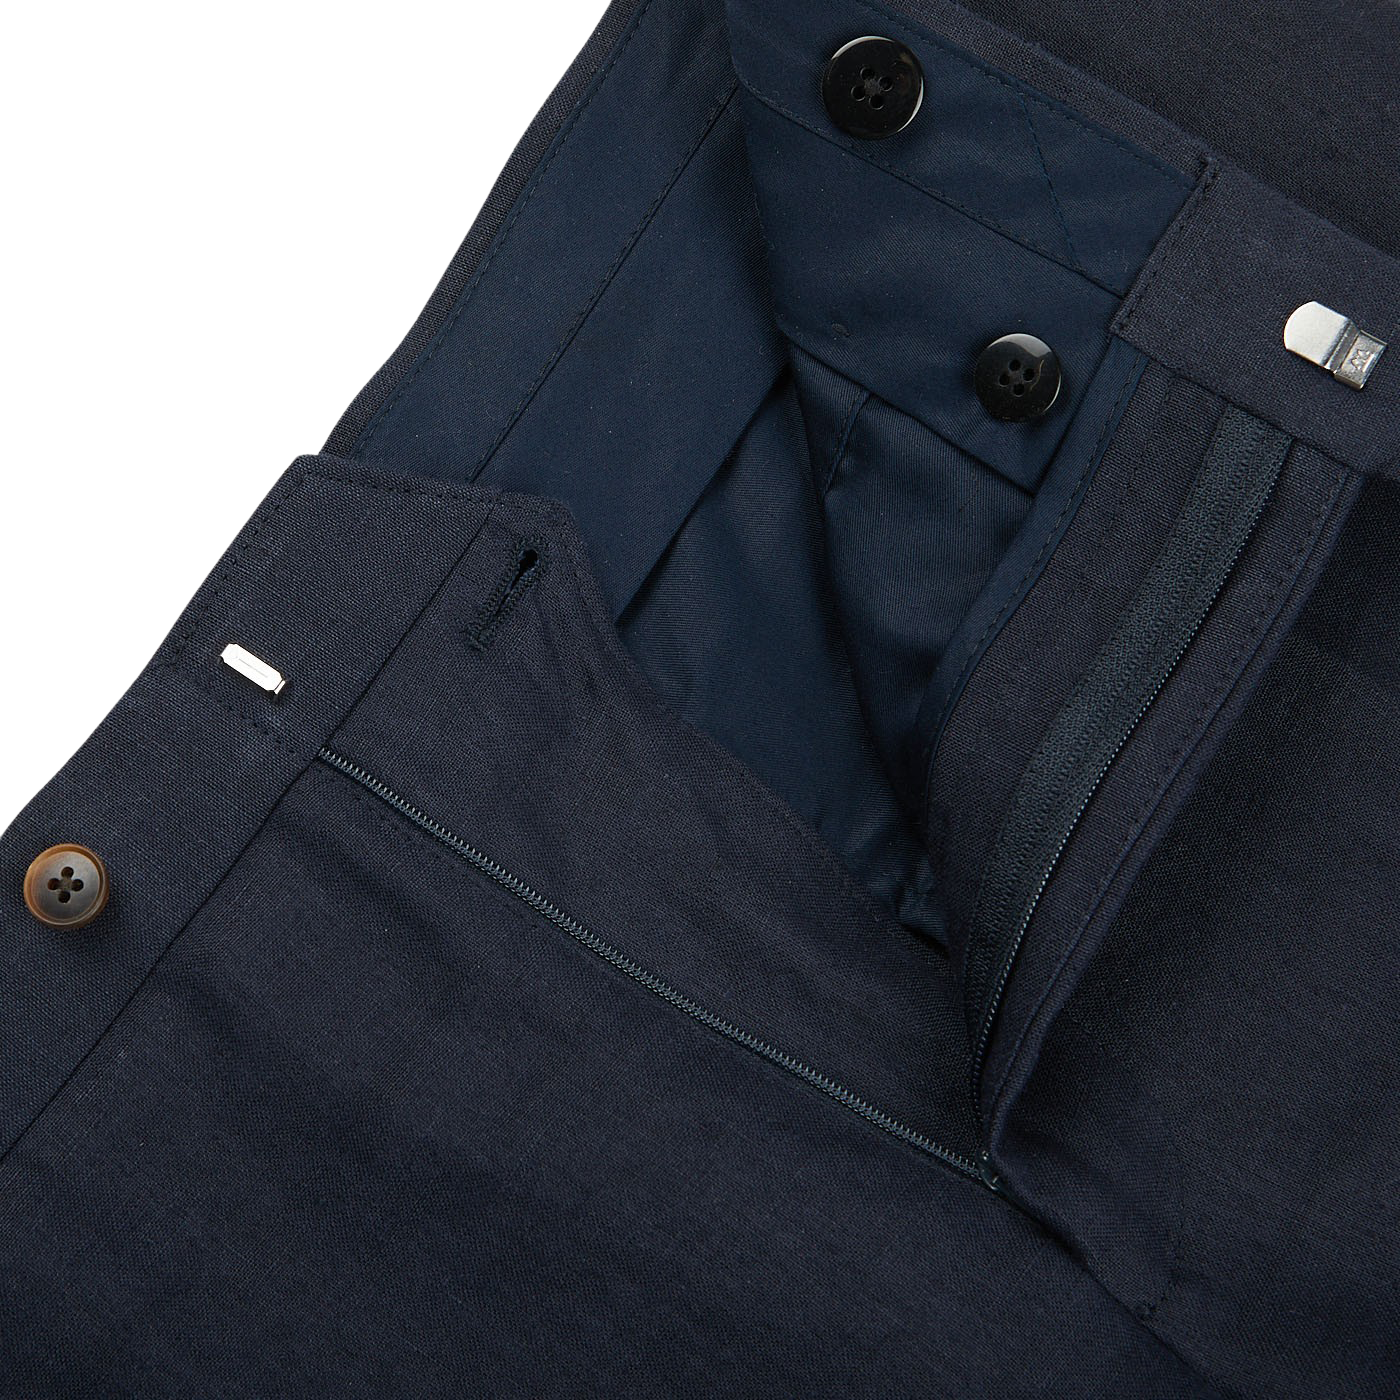 A close up of the pocket of Baltzar Sartorial's Navy Blue Pure Linen Flat Front Trousers.